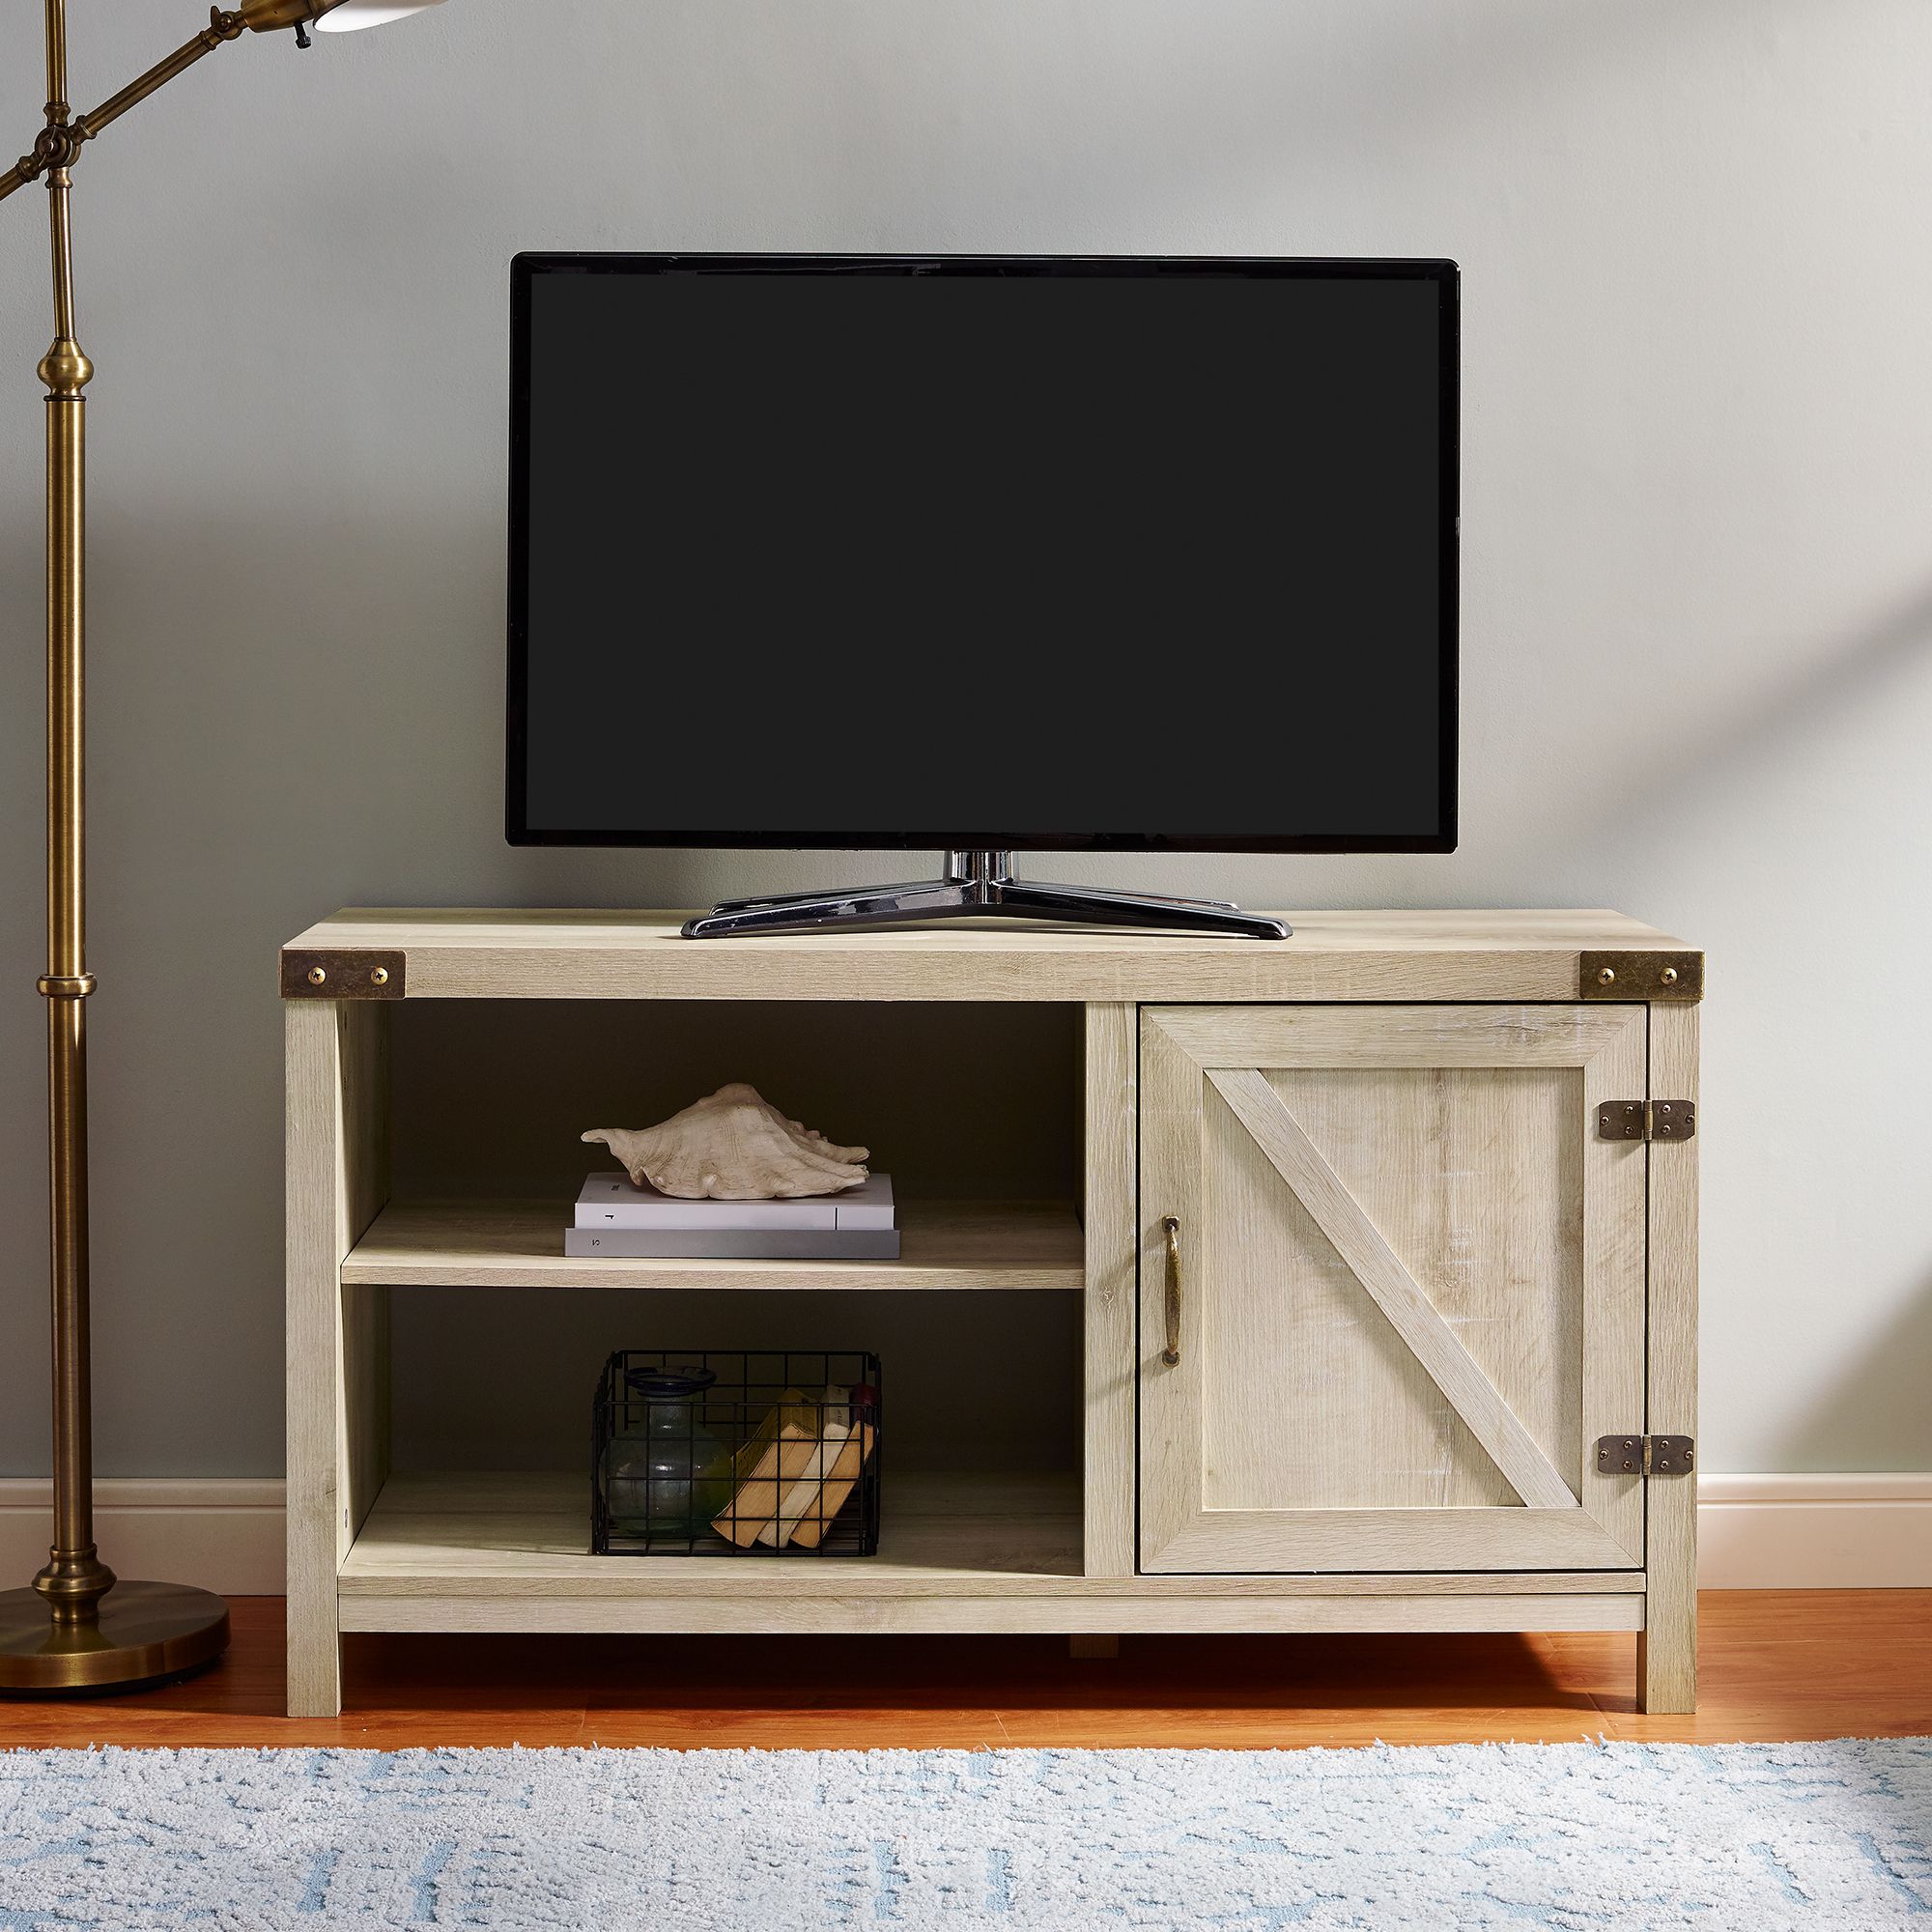 Woven Paths Farmhouse Barn Door Tv Stand For Tvs Up To 50 Throughout Virginia Tv Stands For Tvs Up To 50&quot; (Gallery 6 of 20)